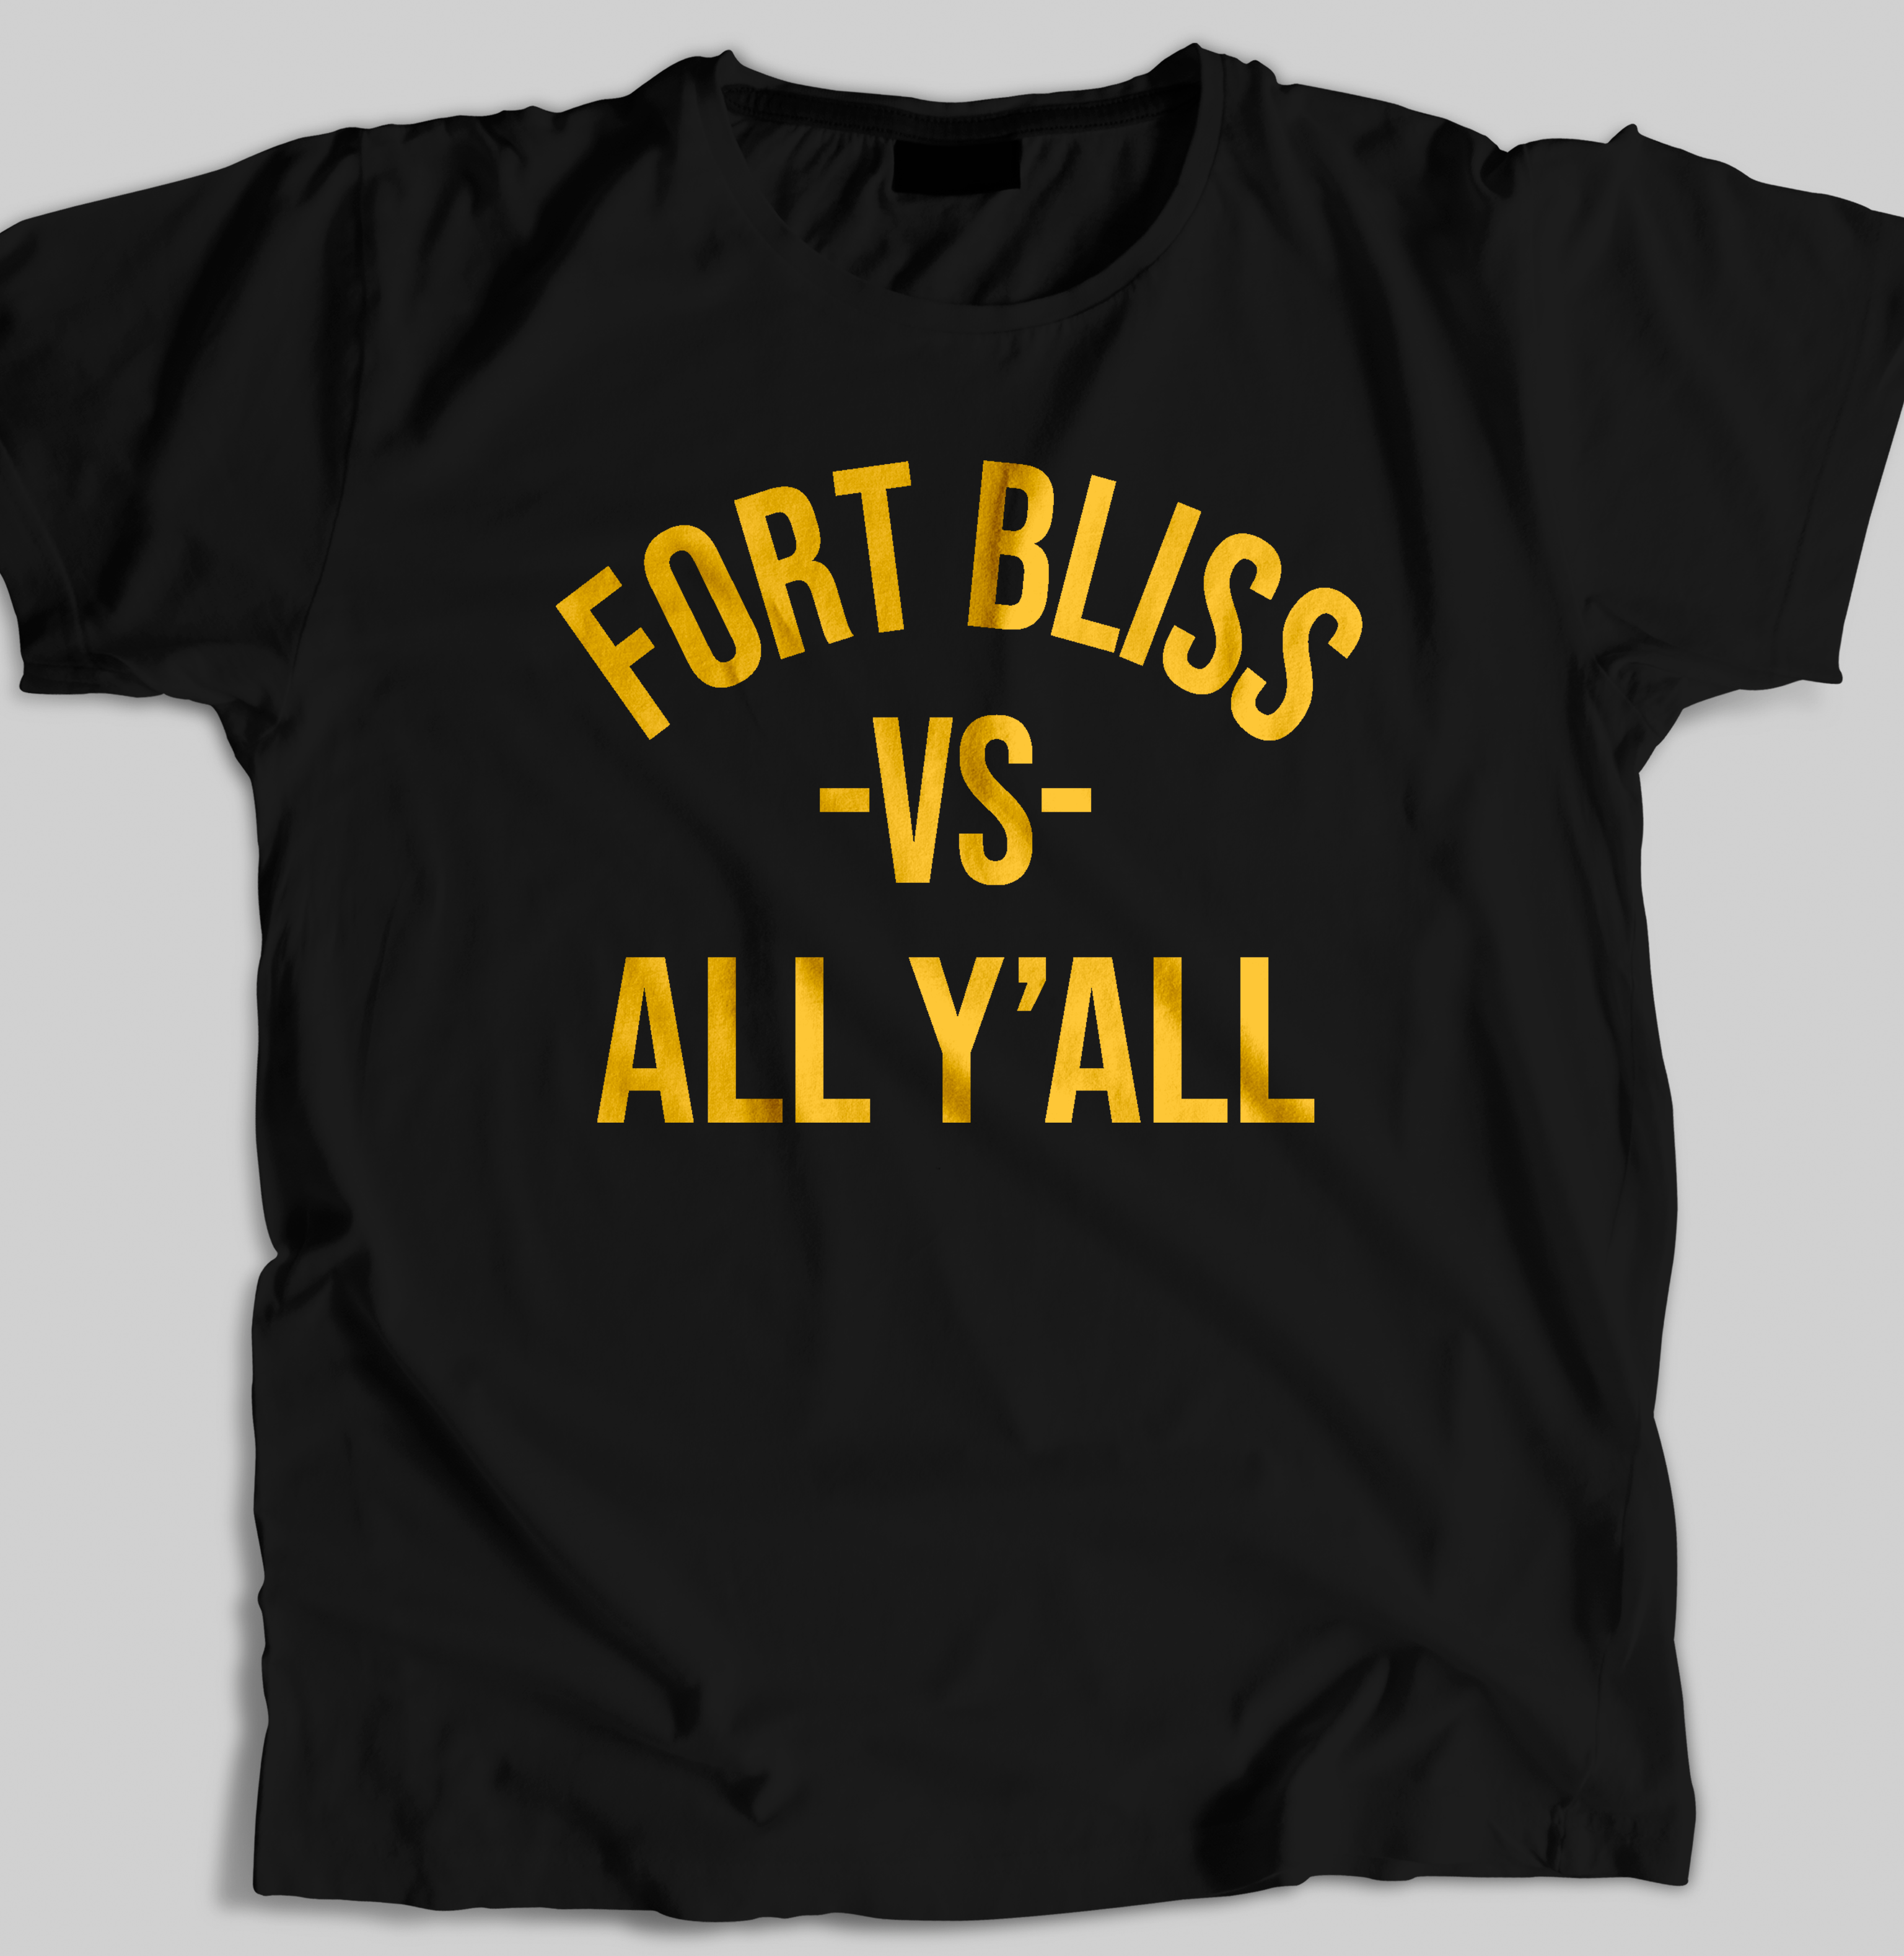 "Fort Bliss vs All Y'all" Men's T-shirt (Black) by Team Dirty